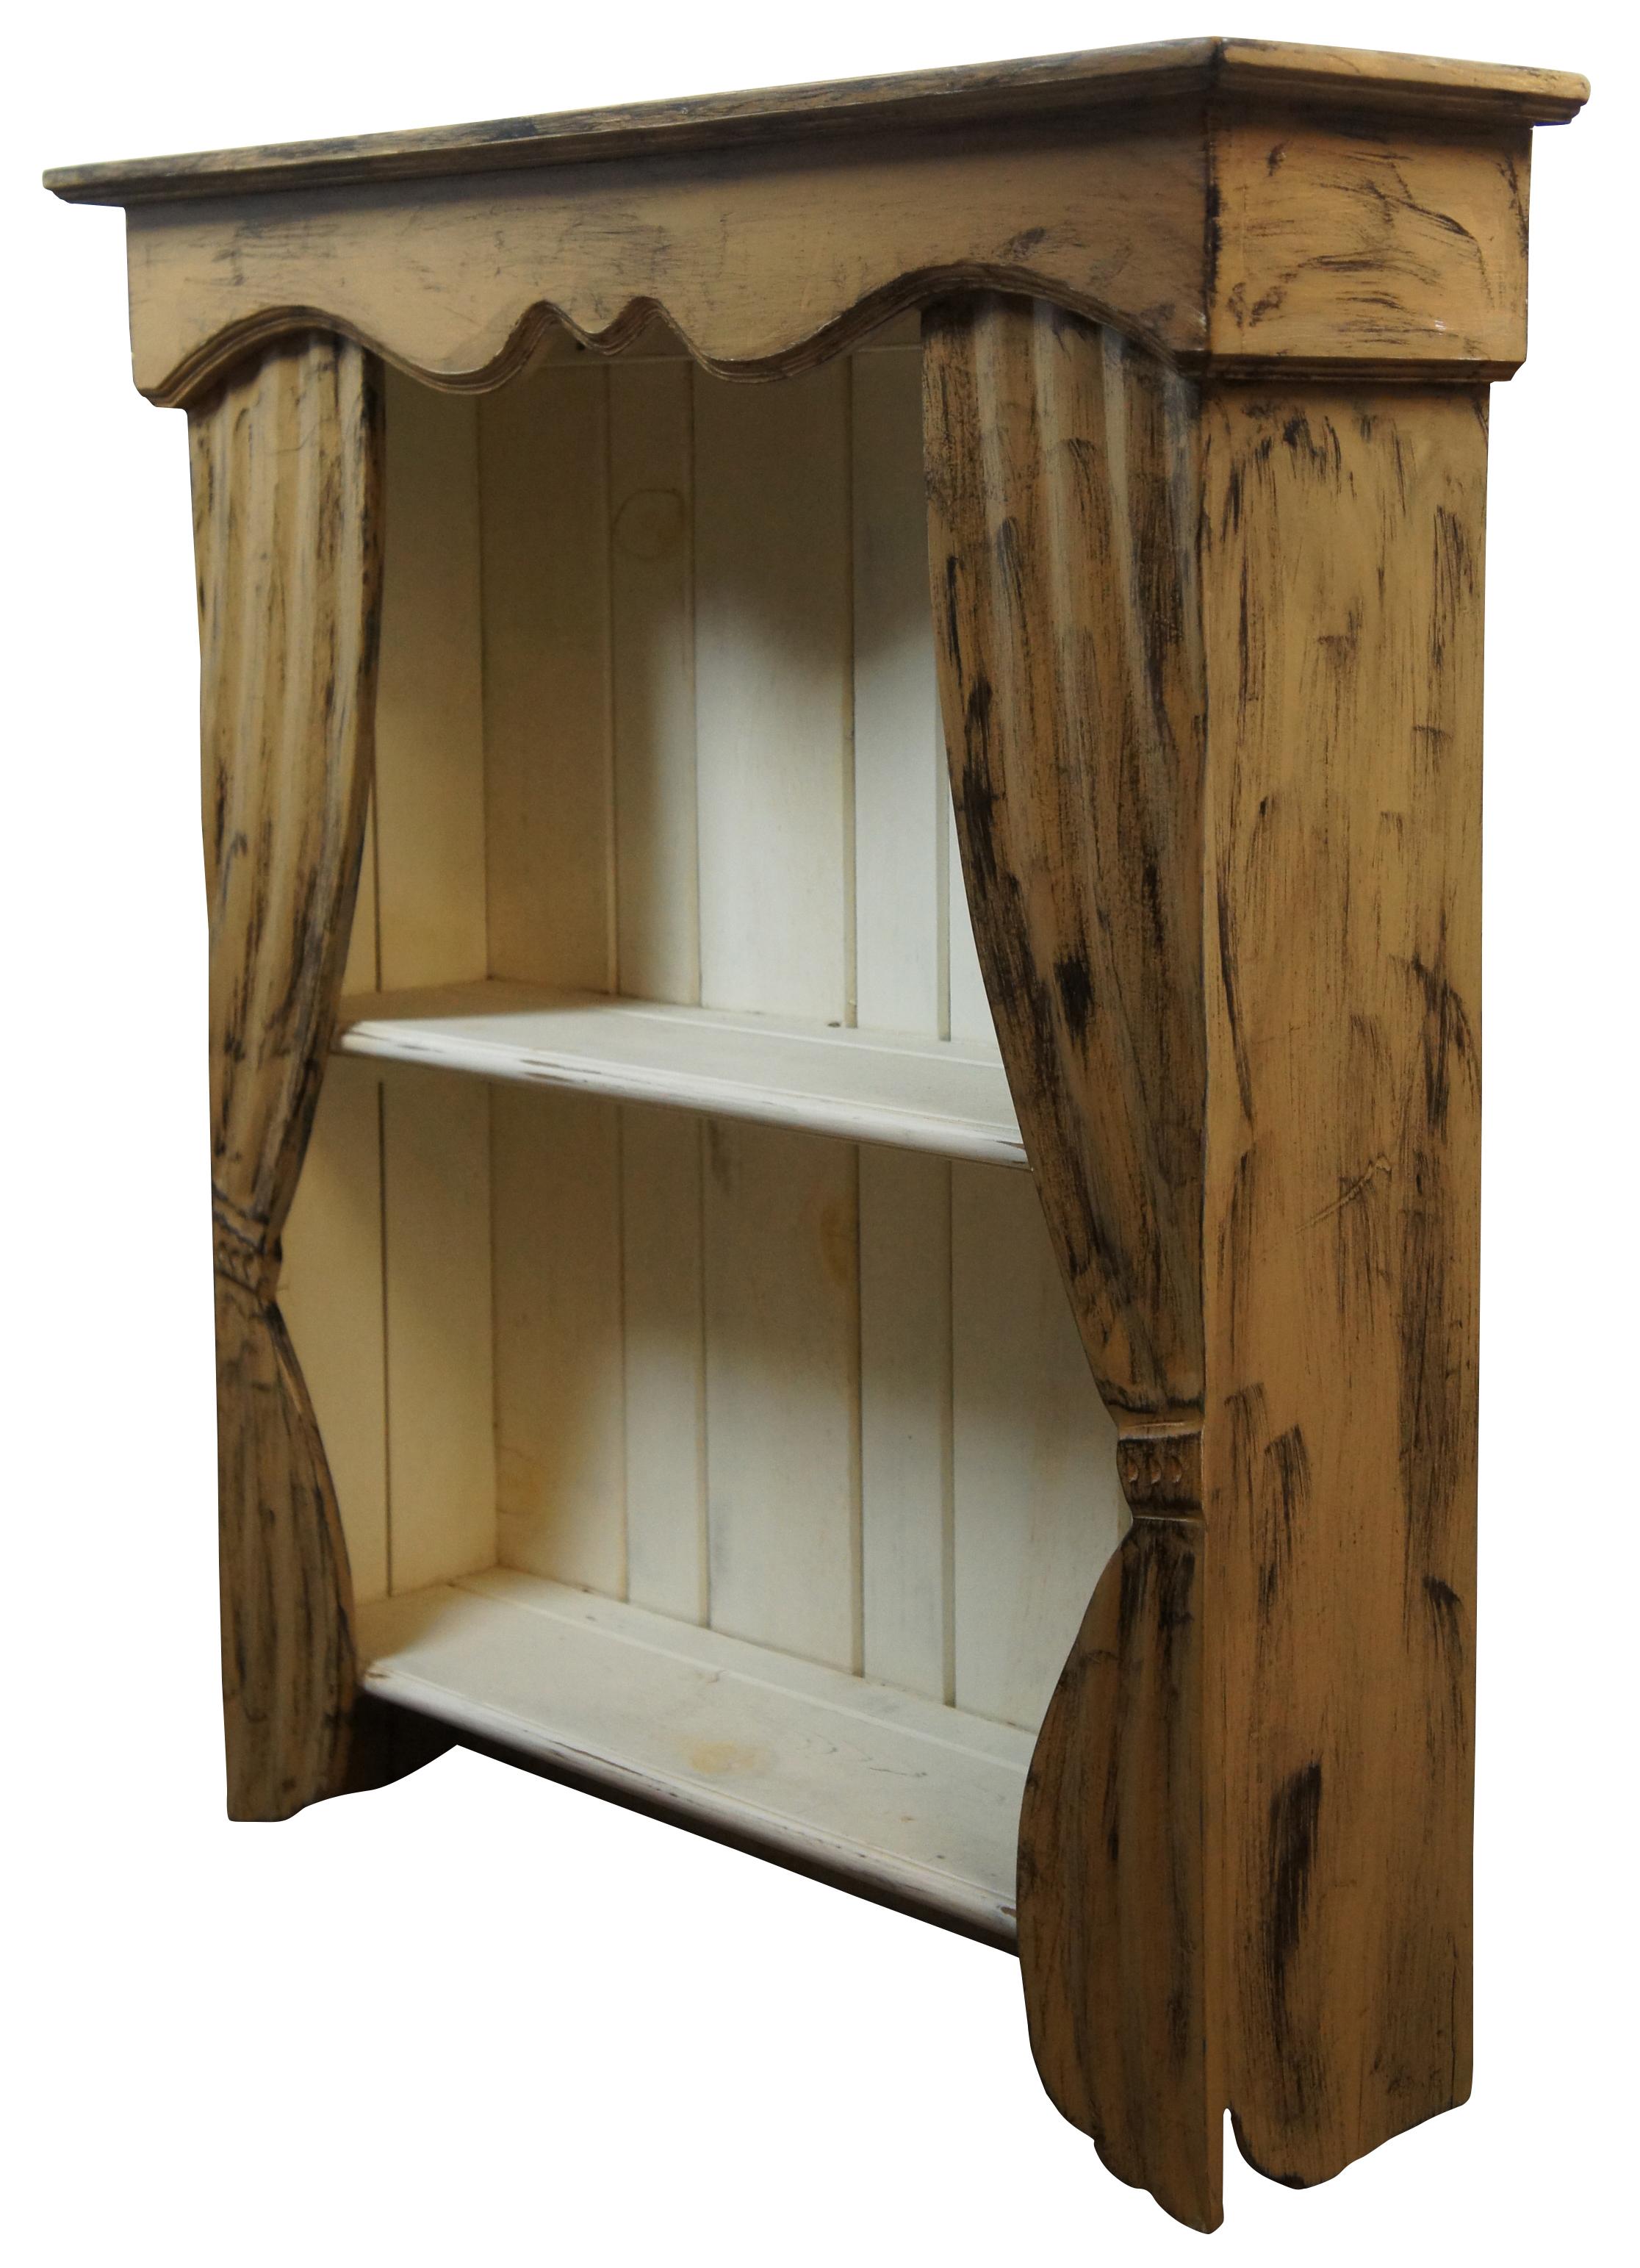 Large antique wall hanging shelf with two tiers, framed like a stage proscenium or window with carved curtains. Made from Pine. Measure: 35